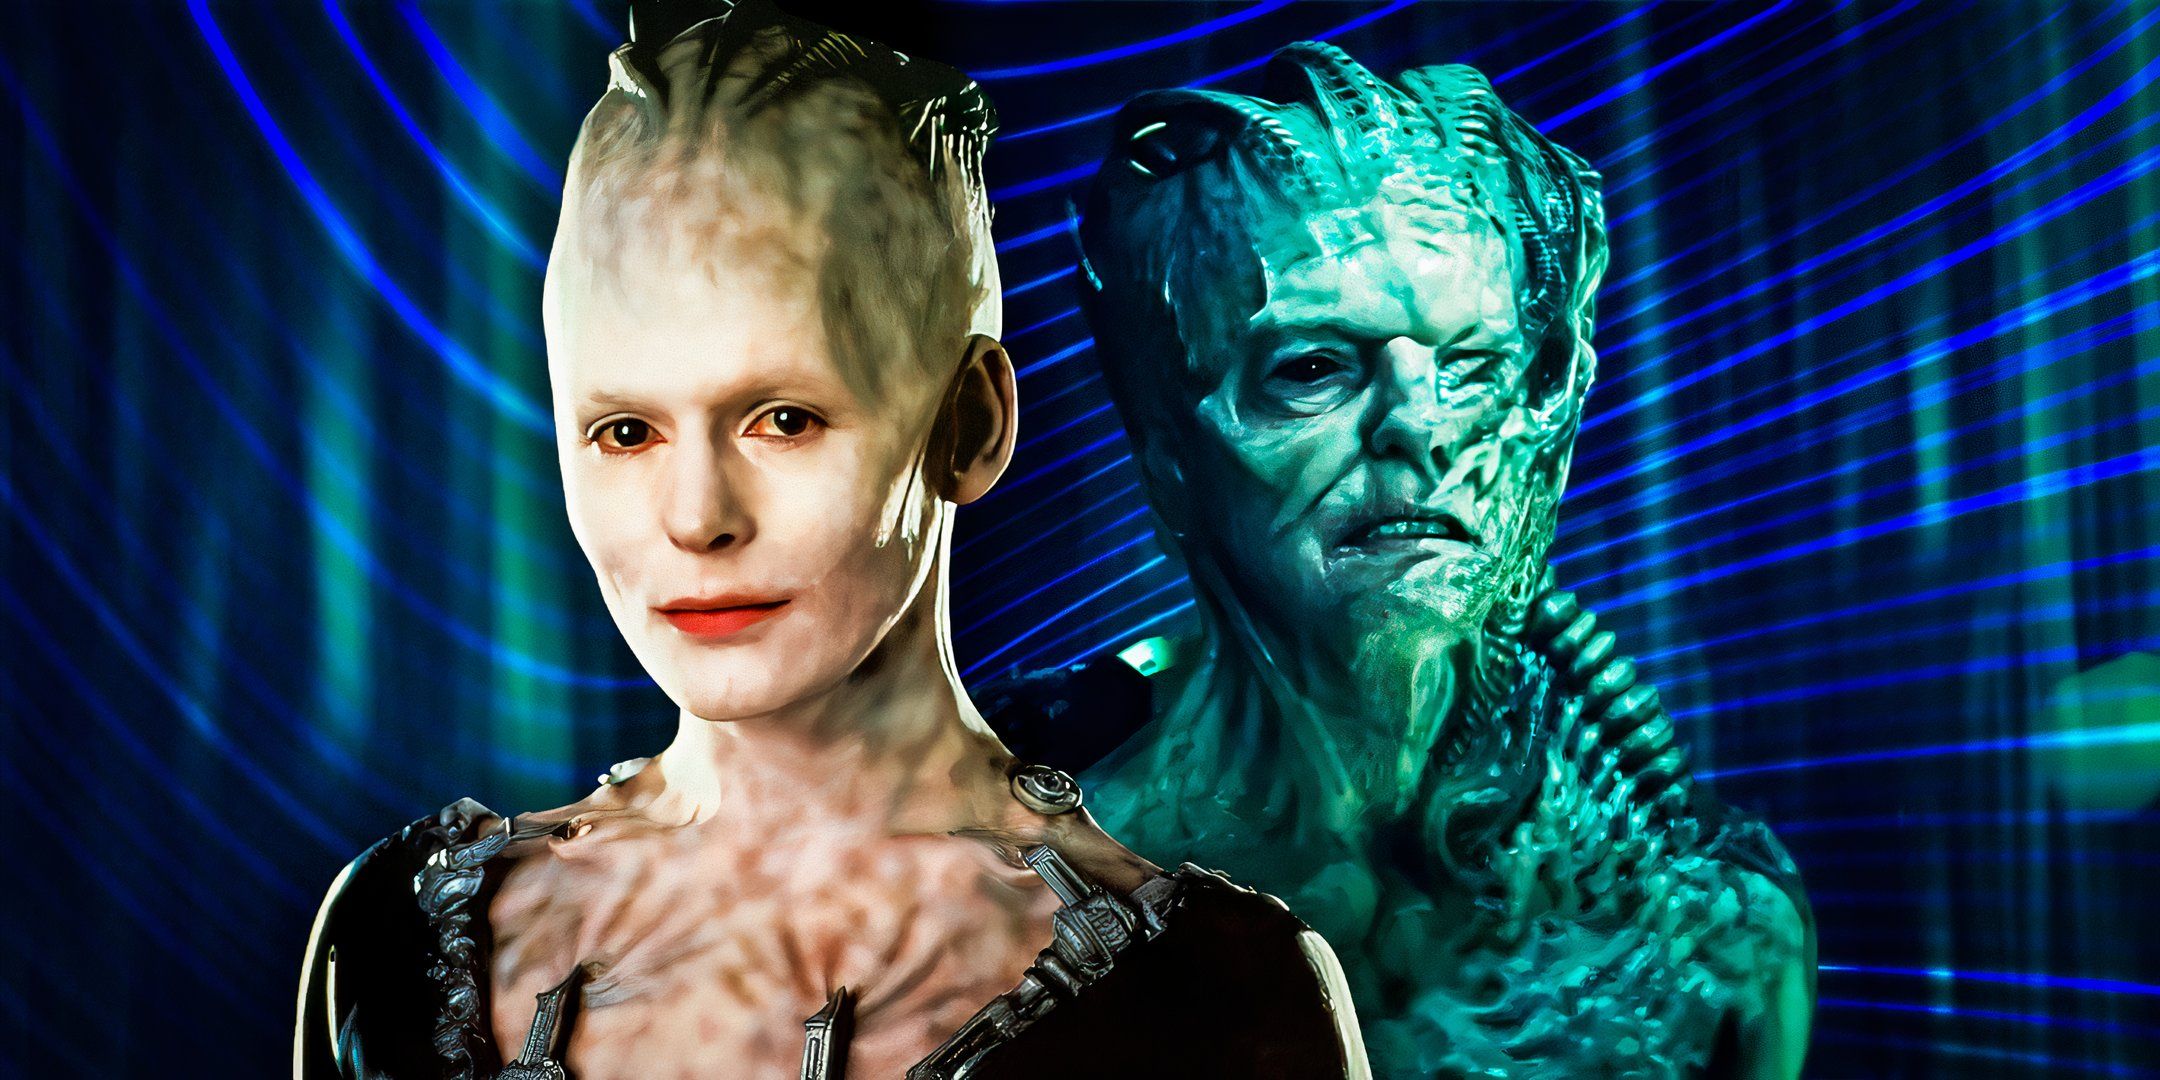 Alice Krige as the original Borg Queen and Jane Edwina Seymour as the deformed Borg Queen